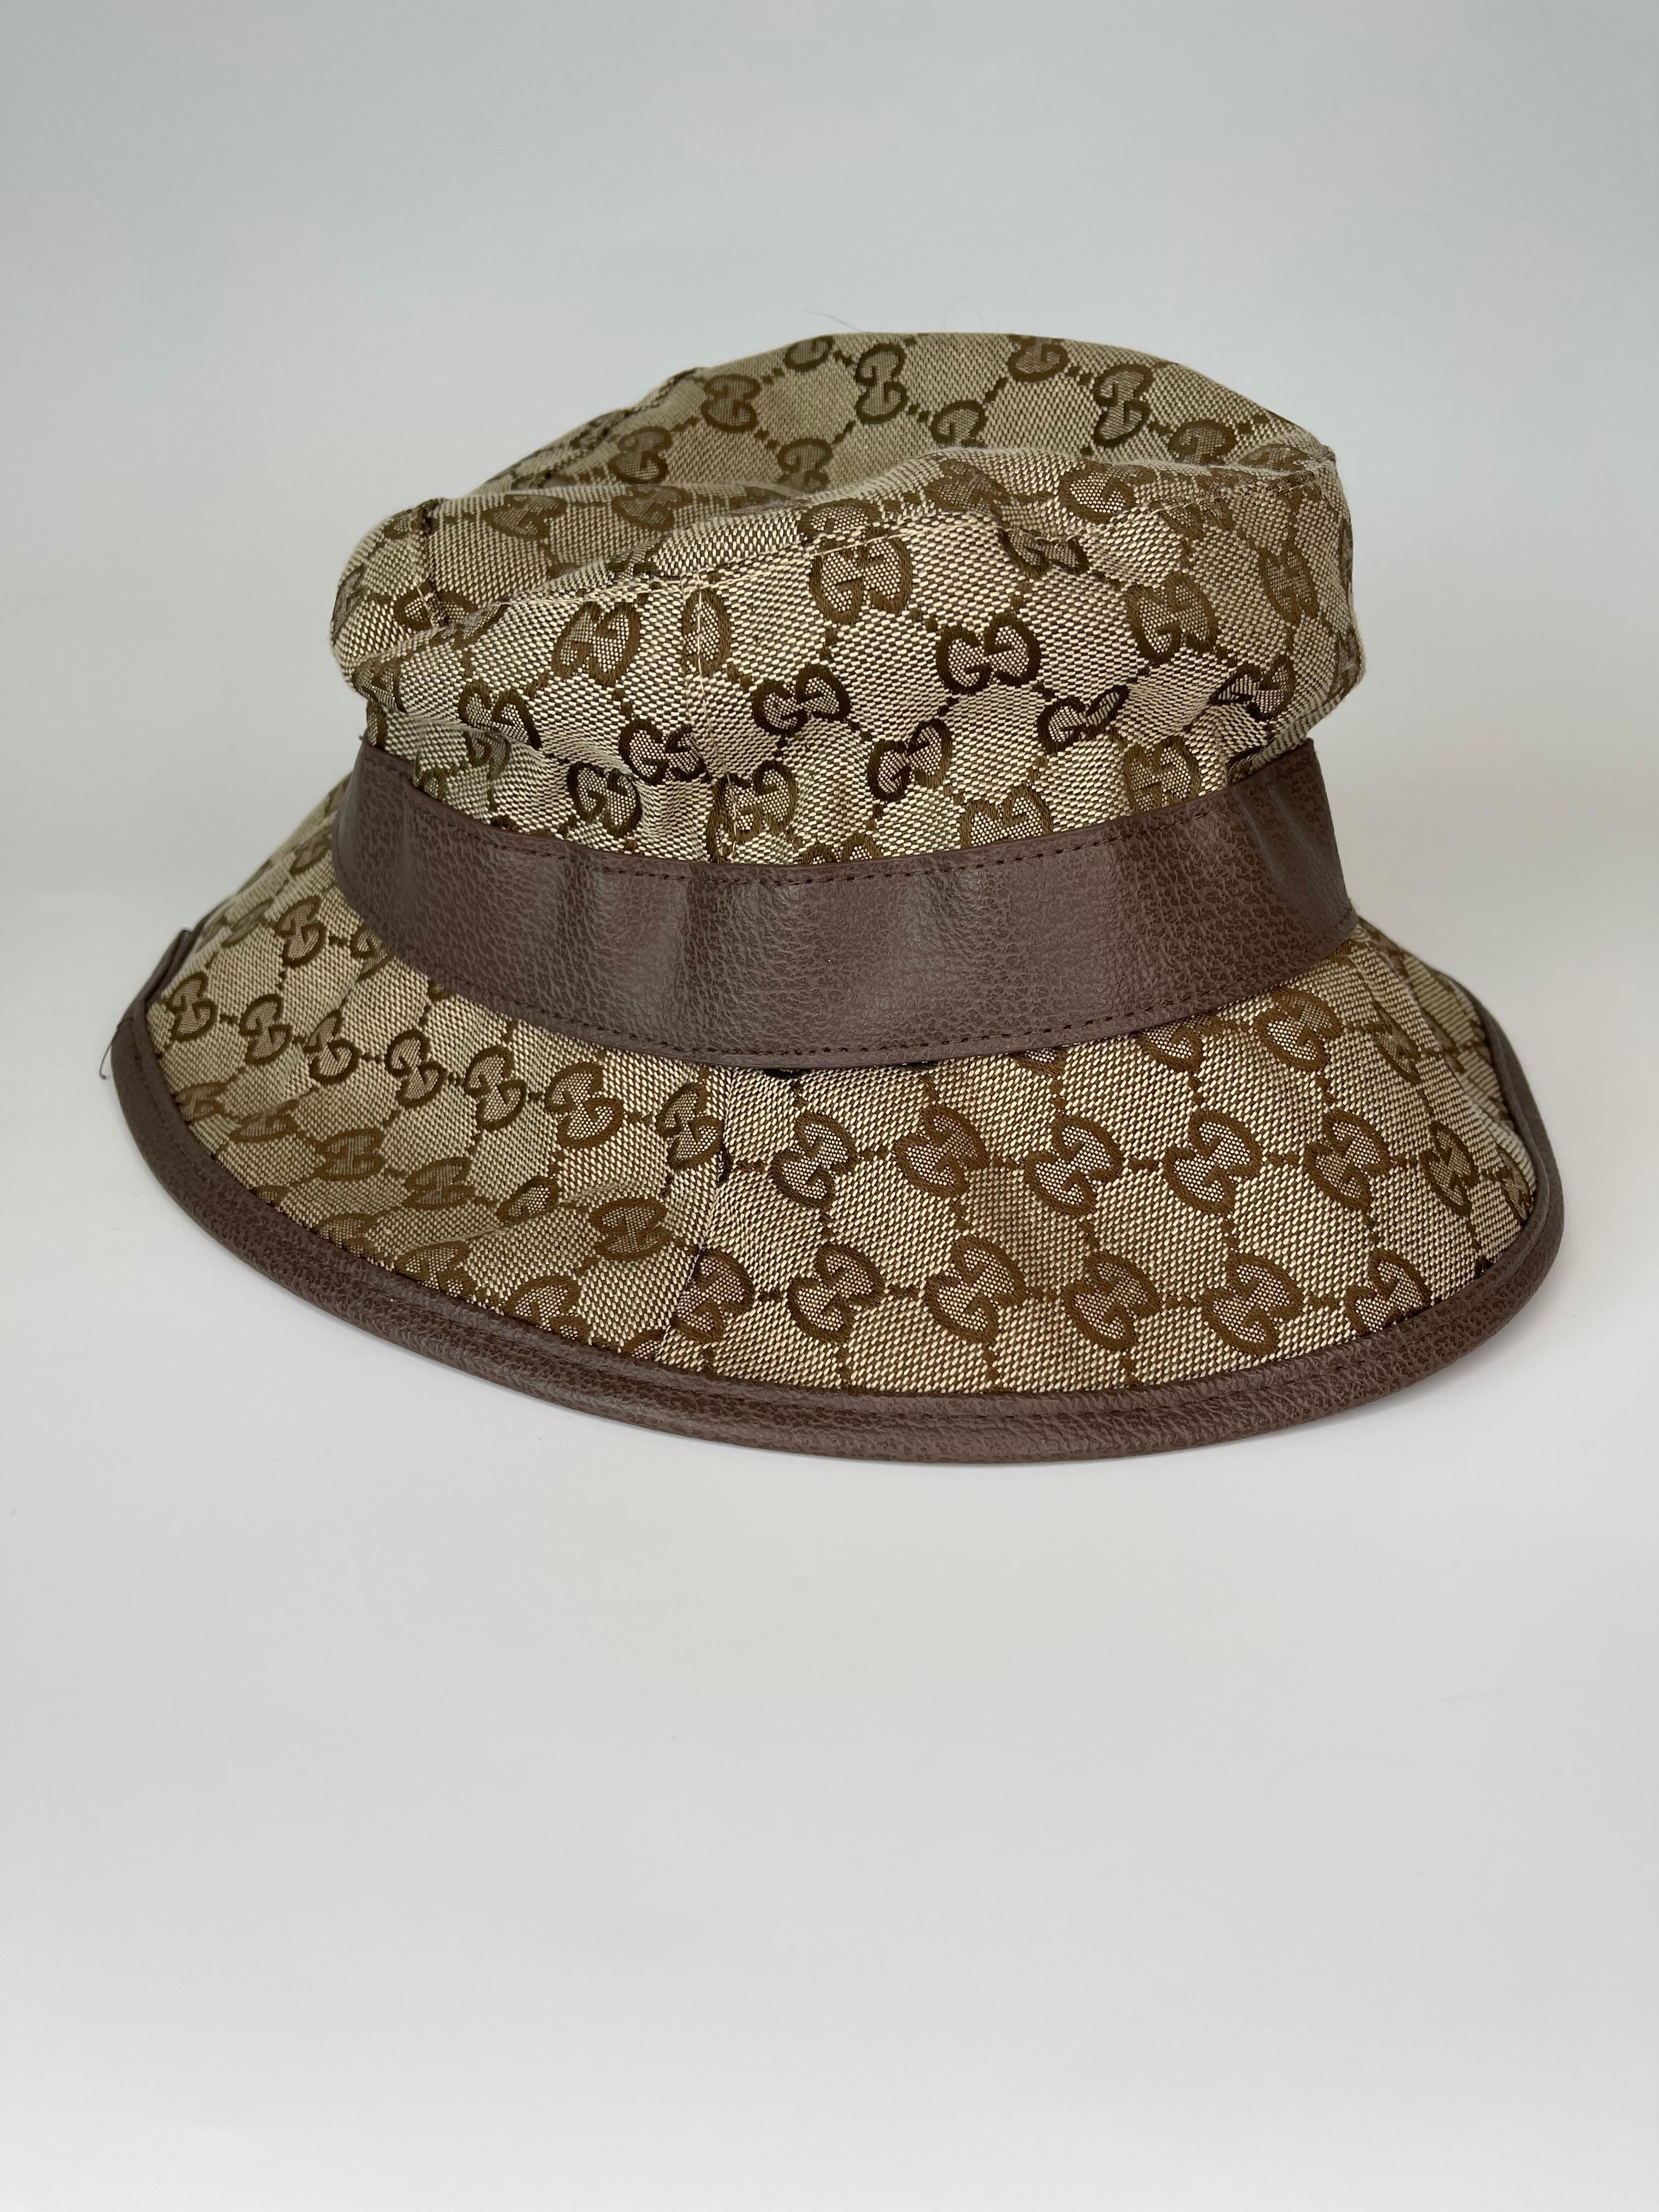 Cotton-blend canvas fedora in beige featuring monogram logo pattern, grained faux-leather trim in brown throughout.  Features GG logo in gold hardware as well. Very good condition. 

COLOR: Beige monogram, brown 
MATERIAL: Canvas, leather,